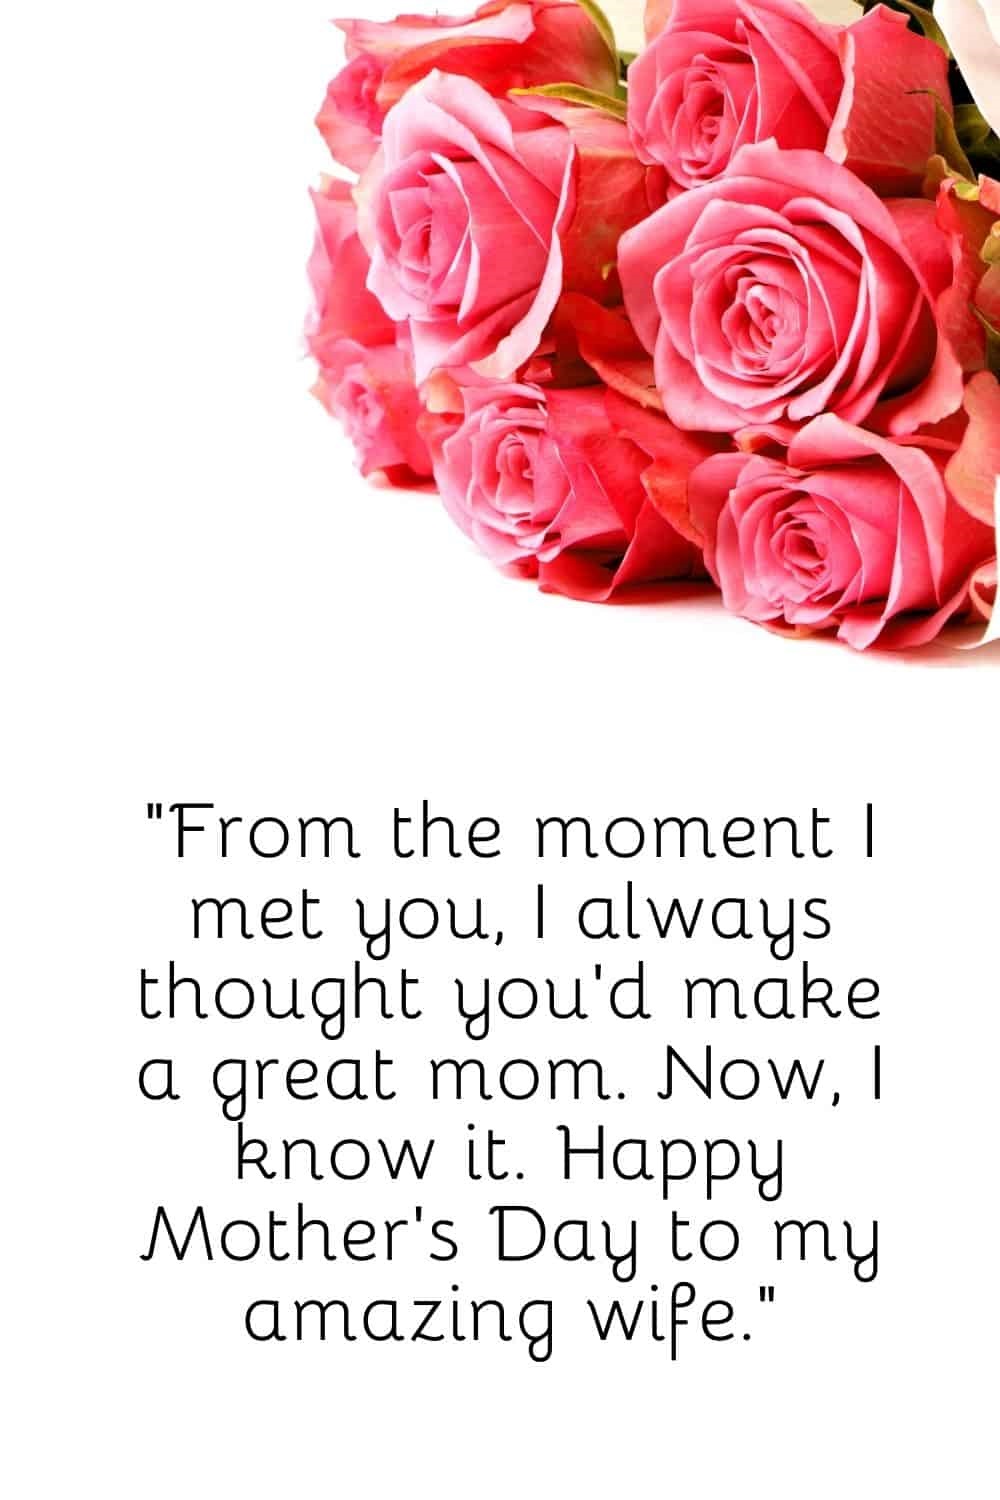 Top 90 Happy Mother's Day Quotes For Wife To Impress Her